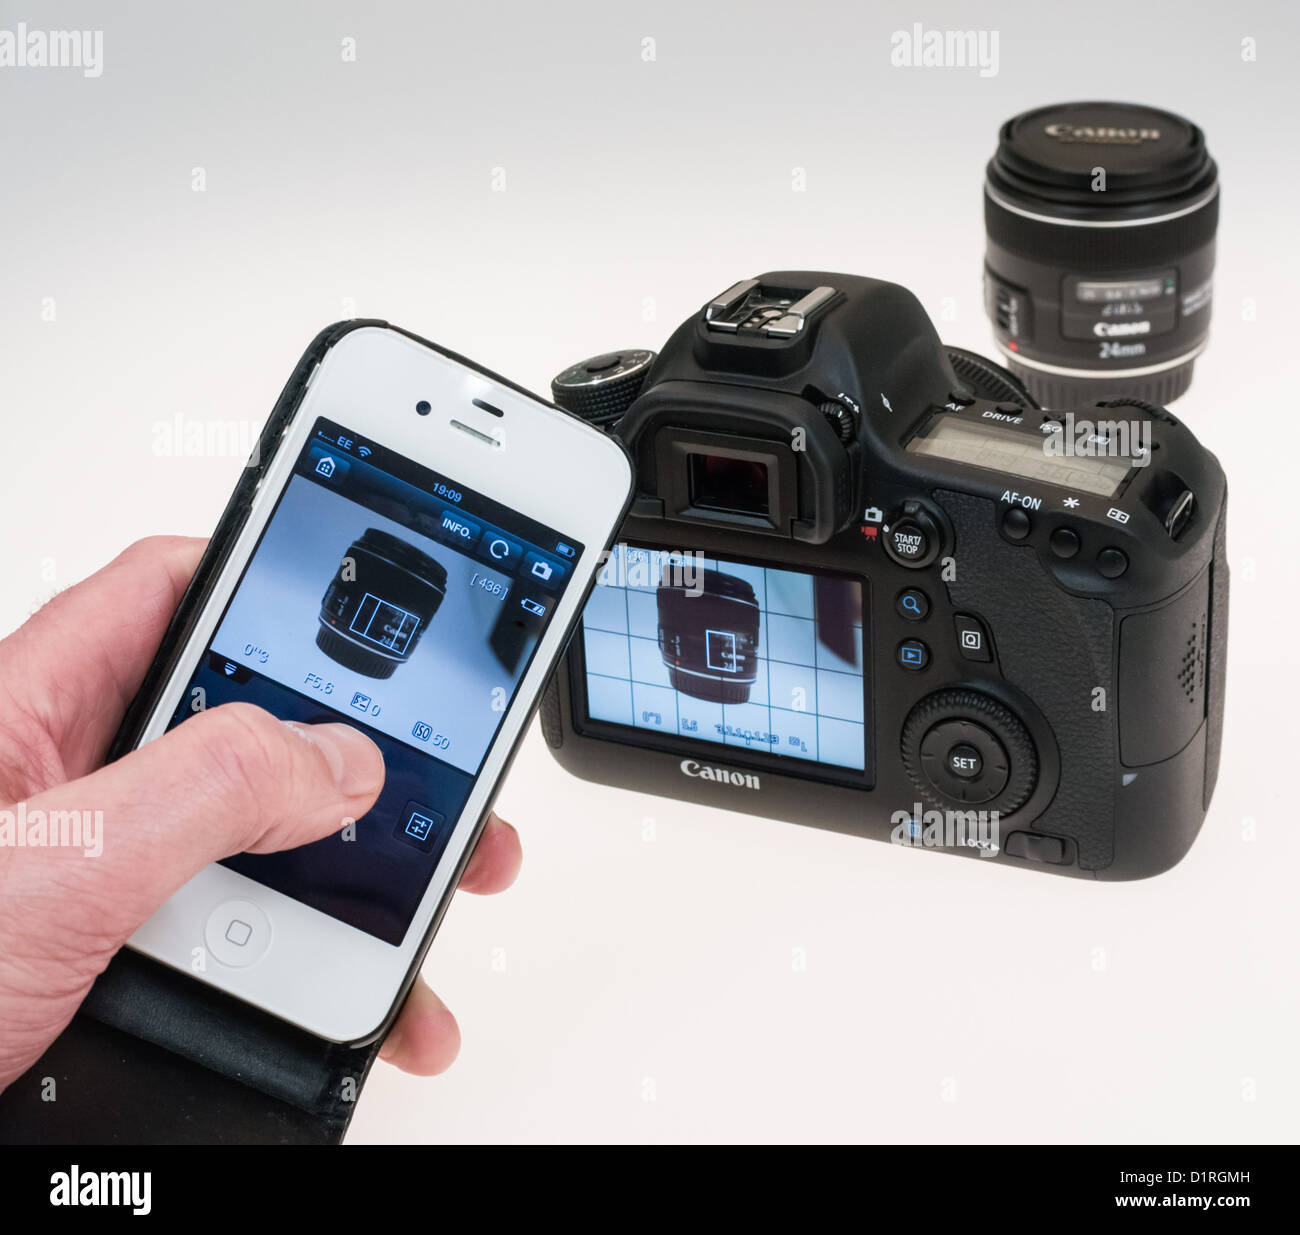 Canon EOS 6D camera - WiFi enabled camera links to EOS Remote app on Apple  iPhone to control camera and capture images Stock Photo - Alamy